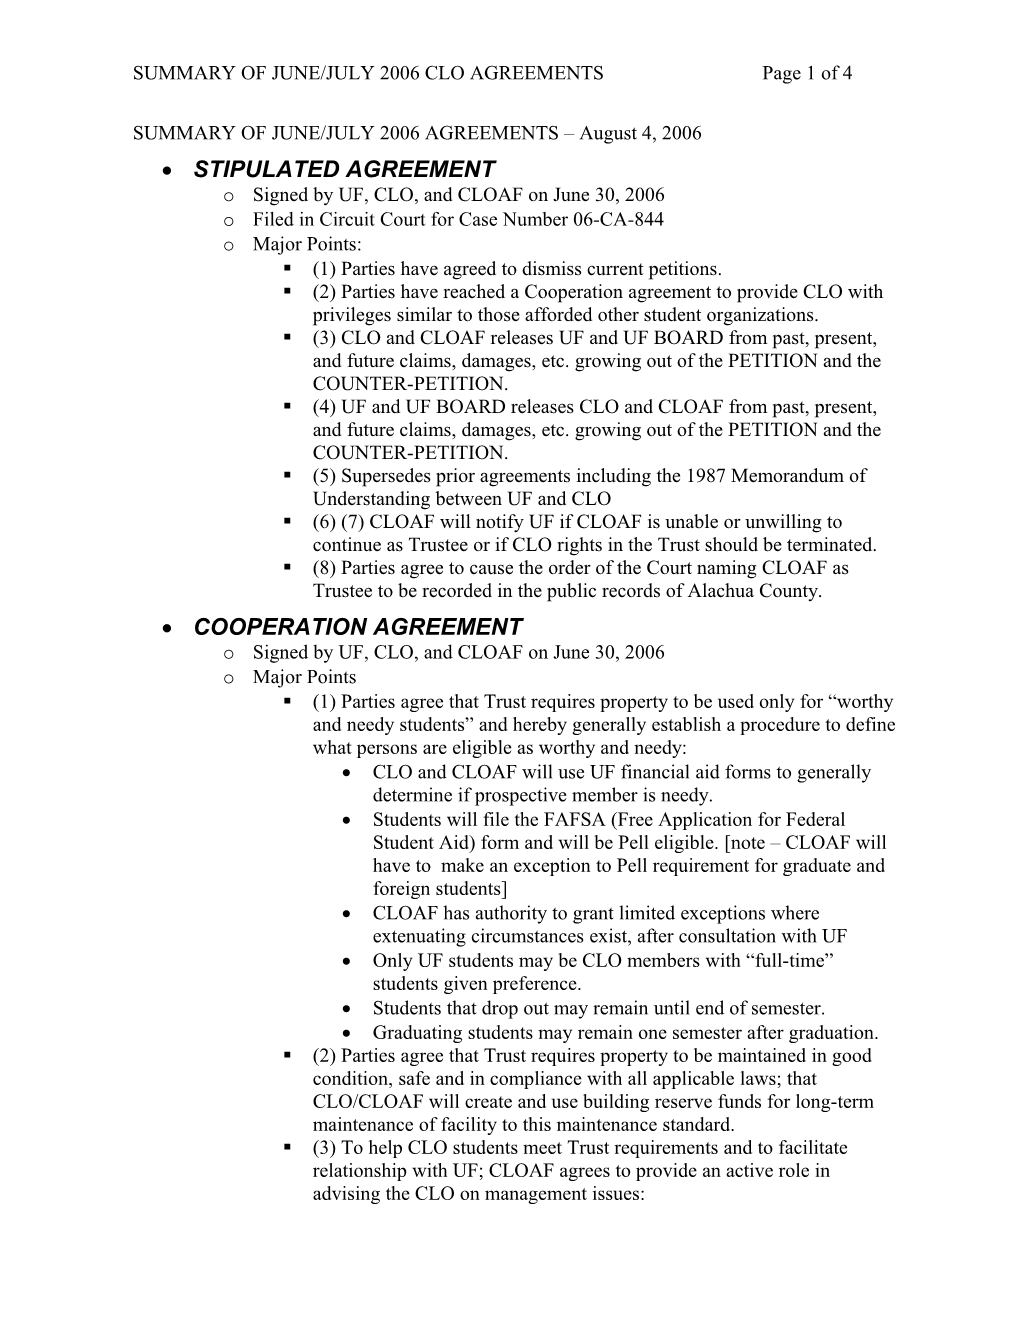 Summary of June 2006 Agreements